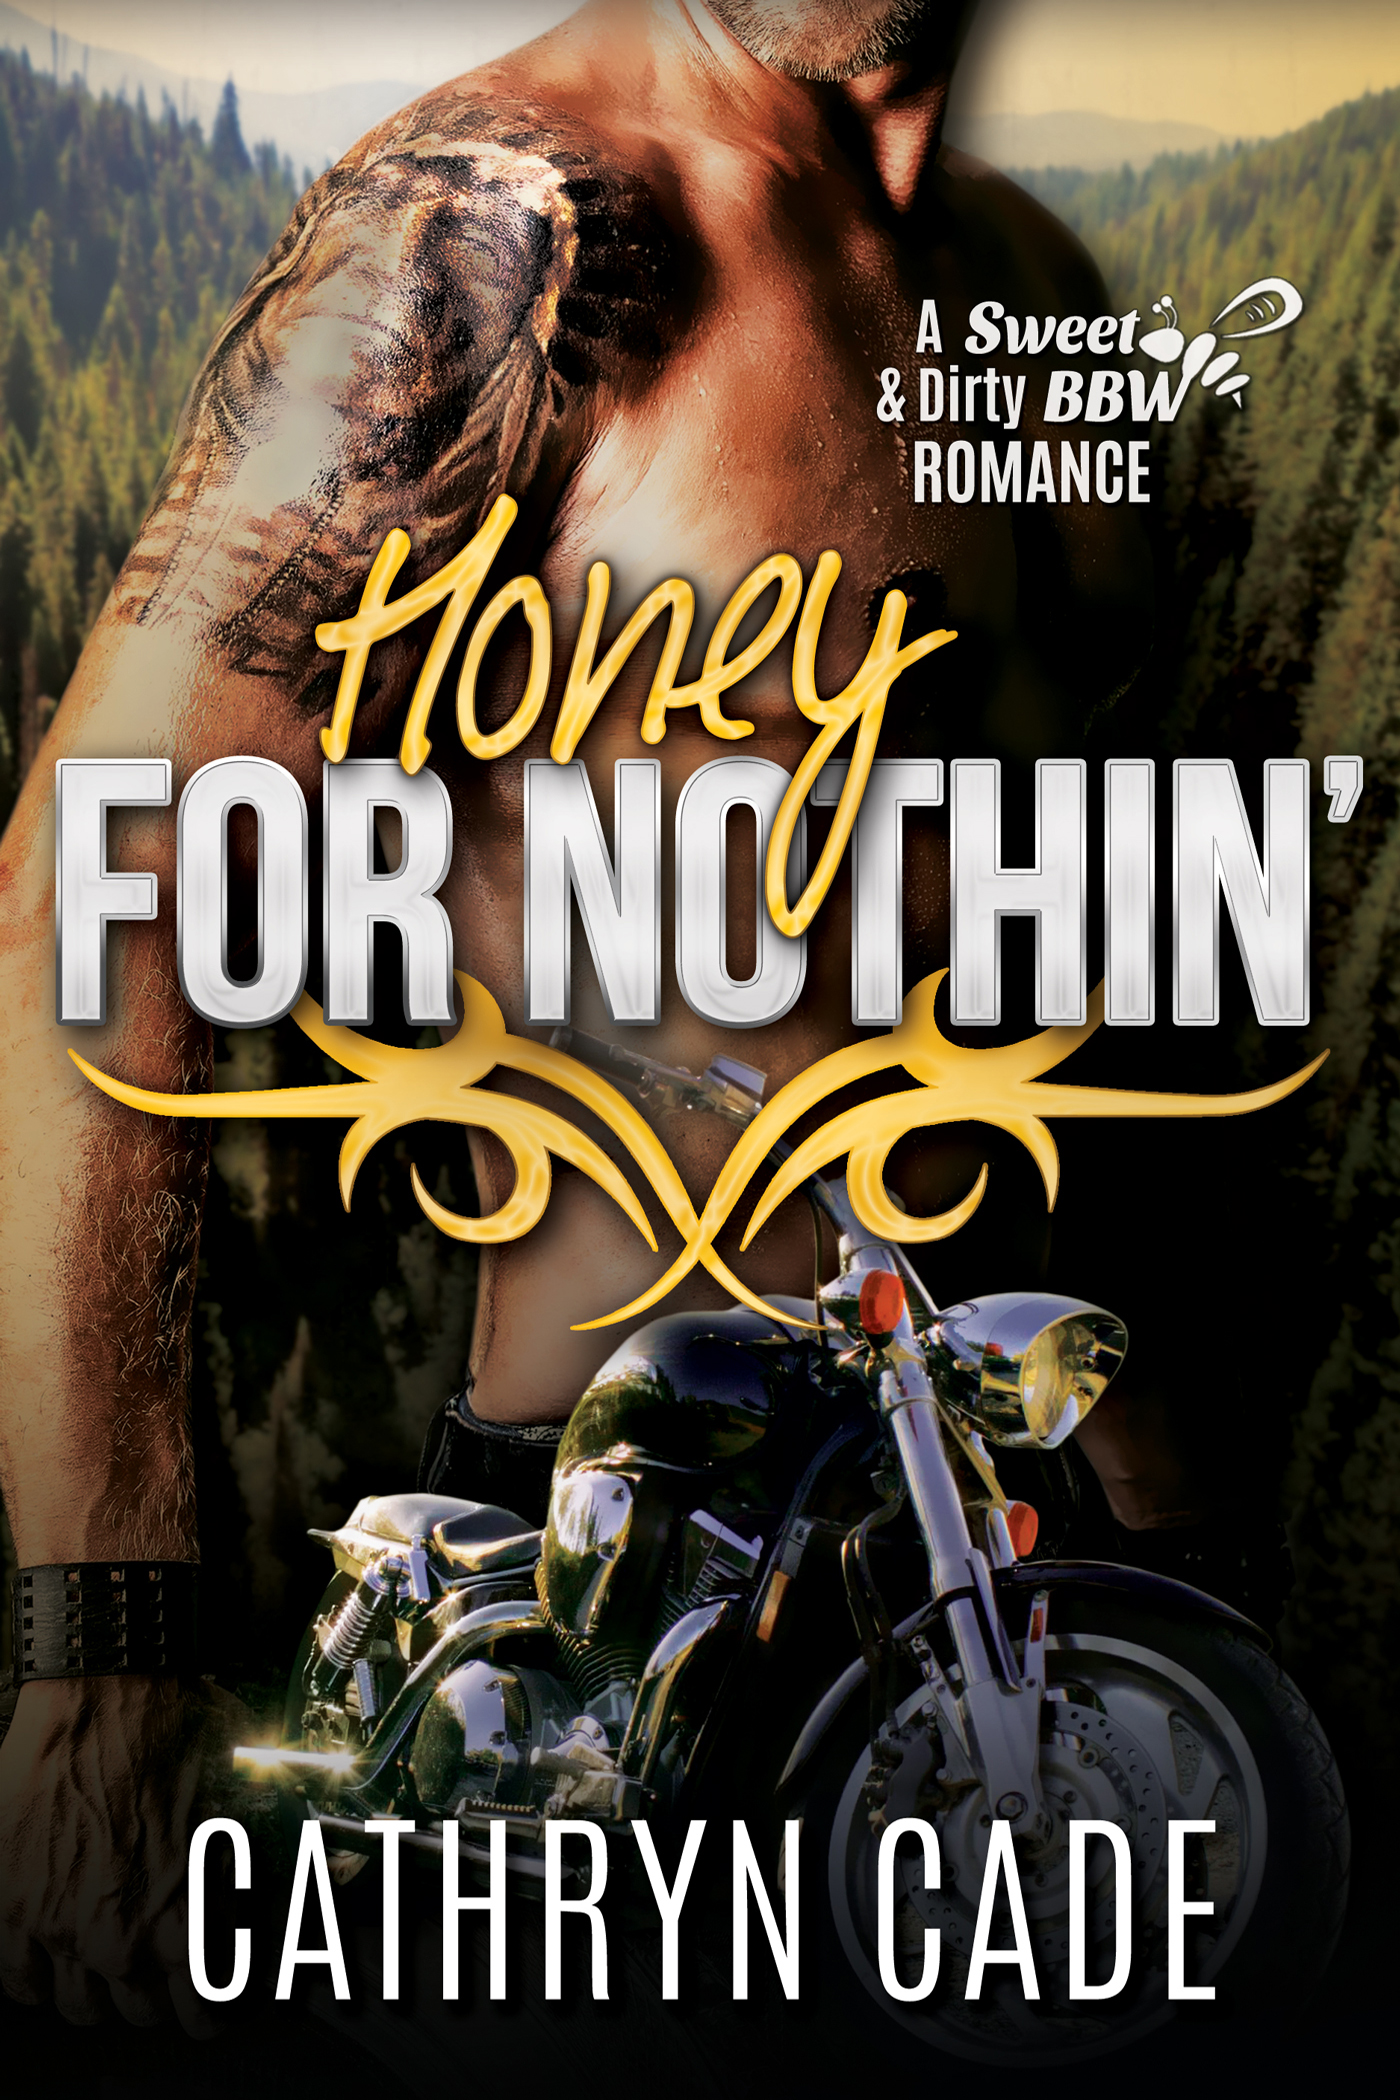 Honey for Nothin’ by Cathryn Cade